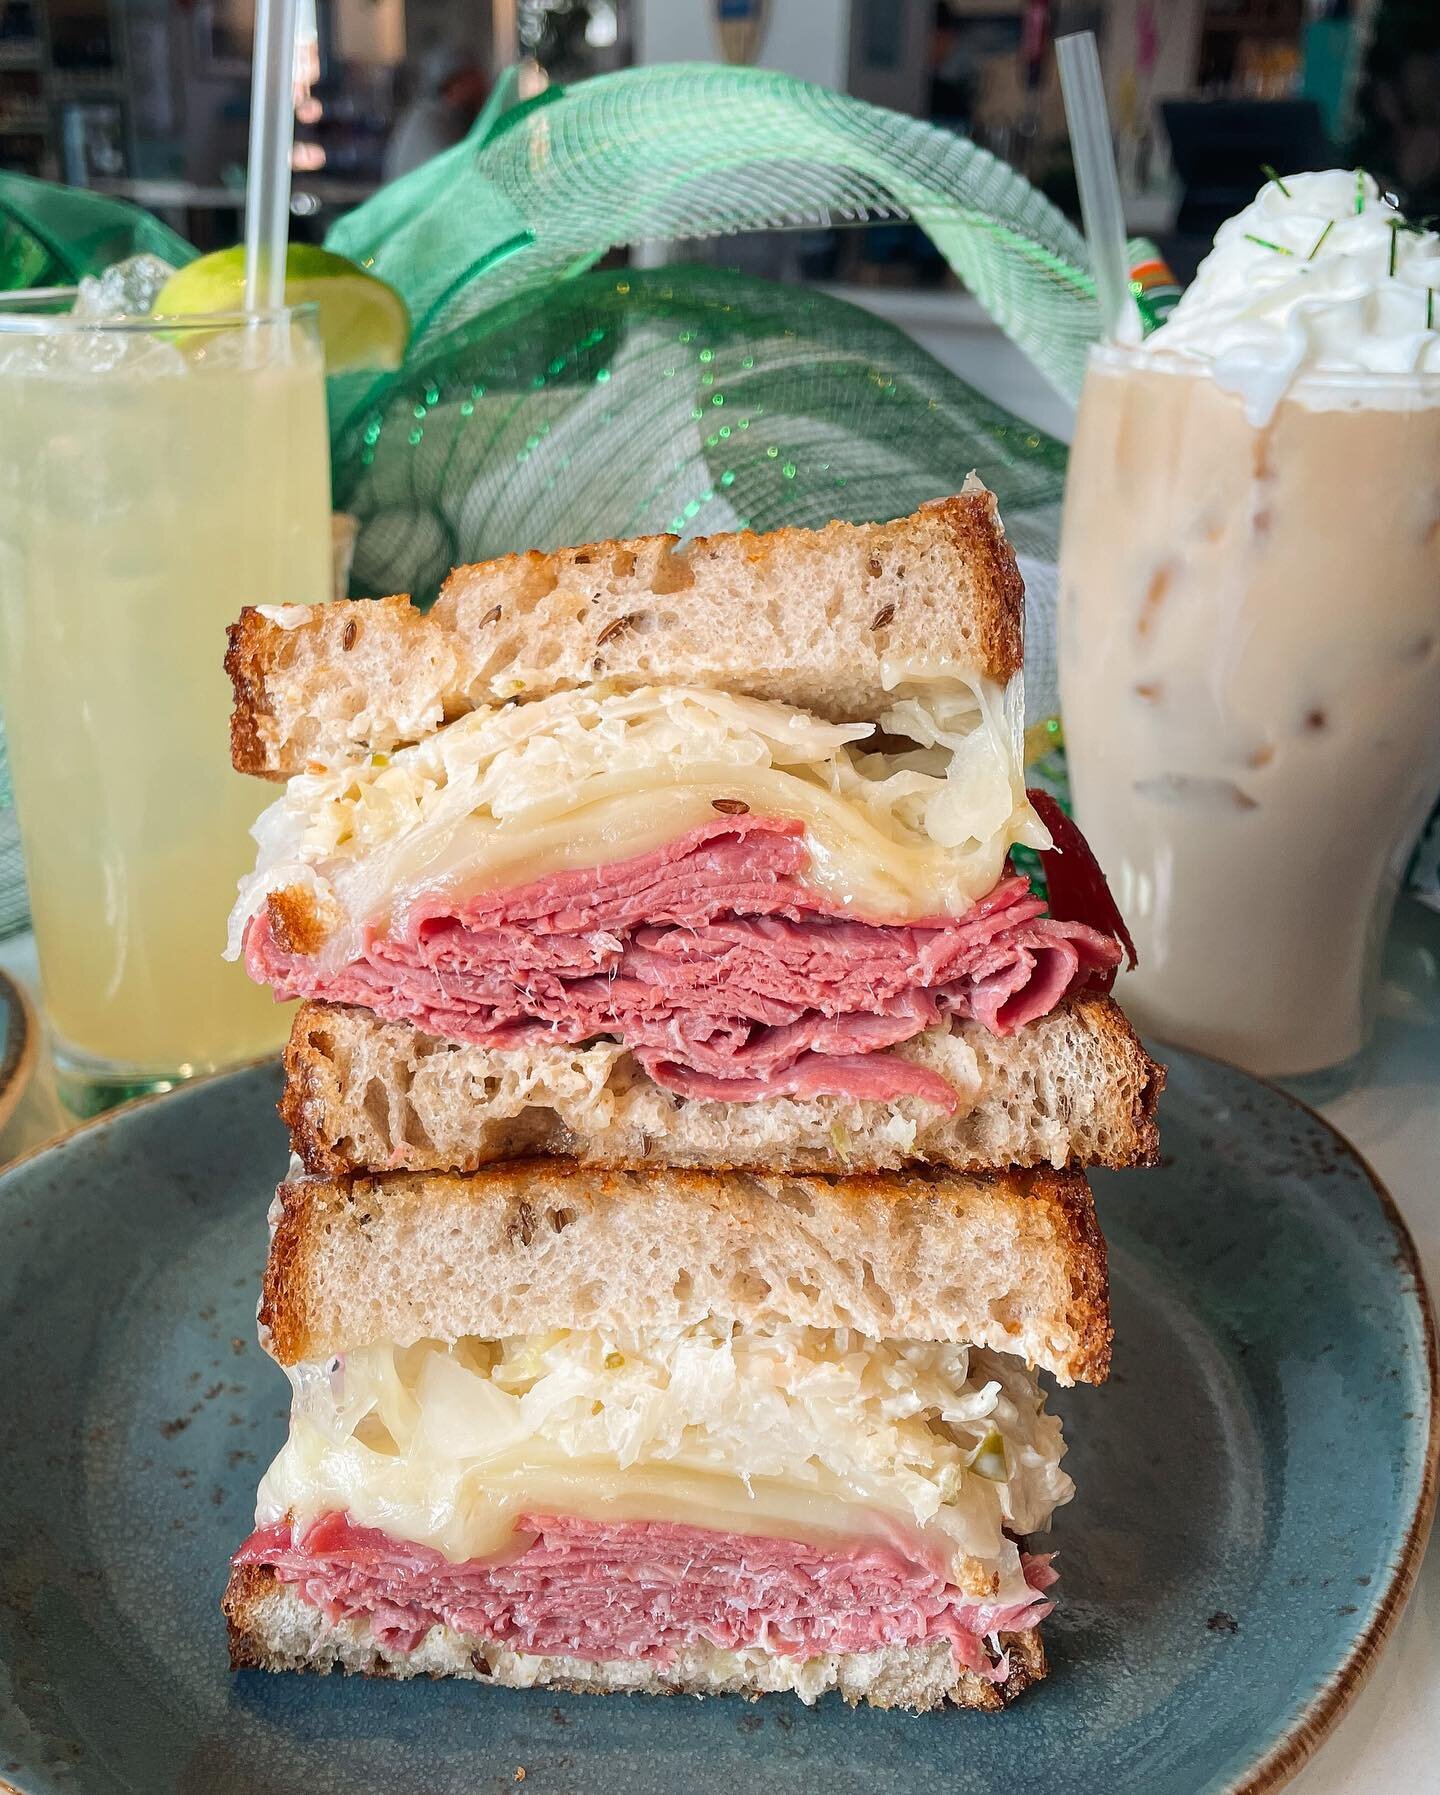 Happy St Paddy&rsquo;s Day to all you lucky tomatoes 🍅 🍀 its time to get #coveredincornbeef. St. Paddys day specials running all weekend for any playful leprechauns. 
👉🏼Ruby&rsquo;s Reuben- available all day until 9pm Fri+Sat &amp; Sunday until 4